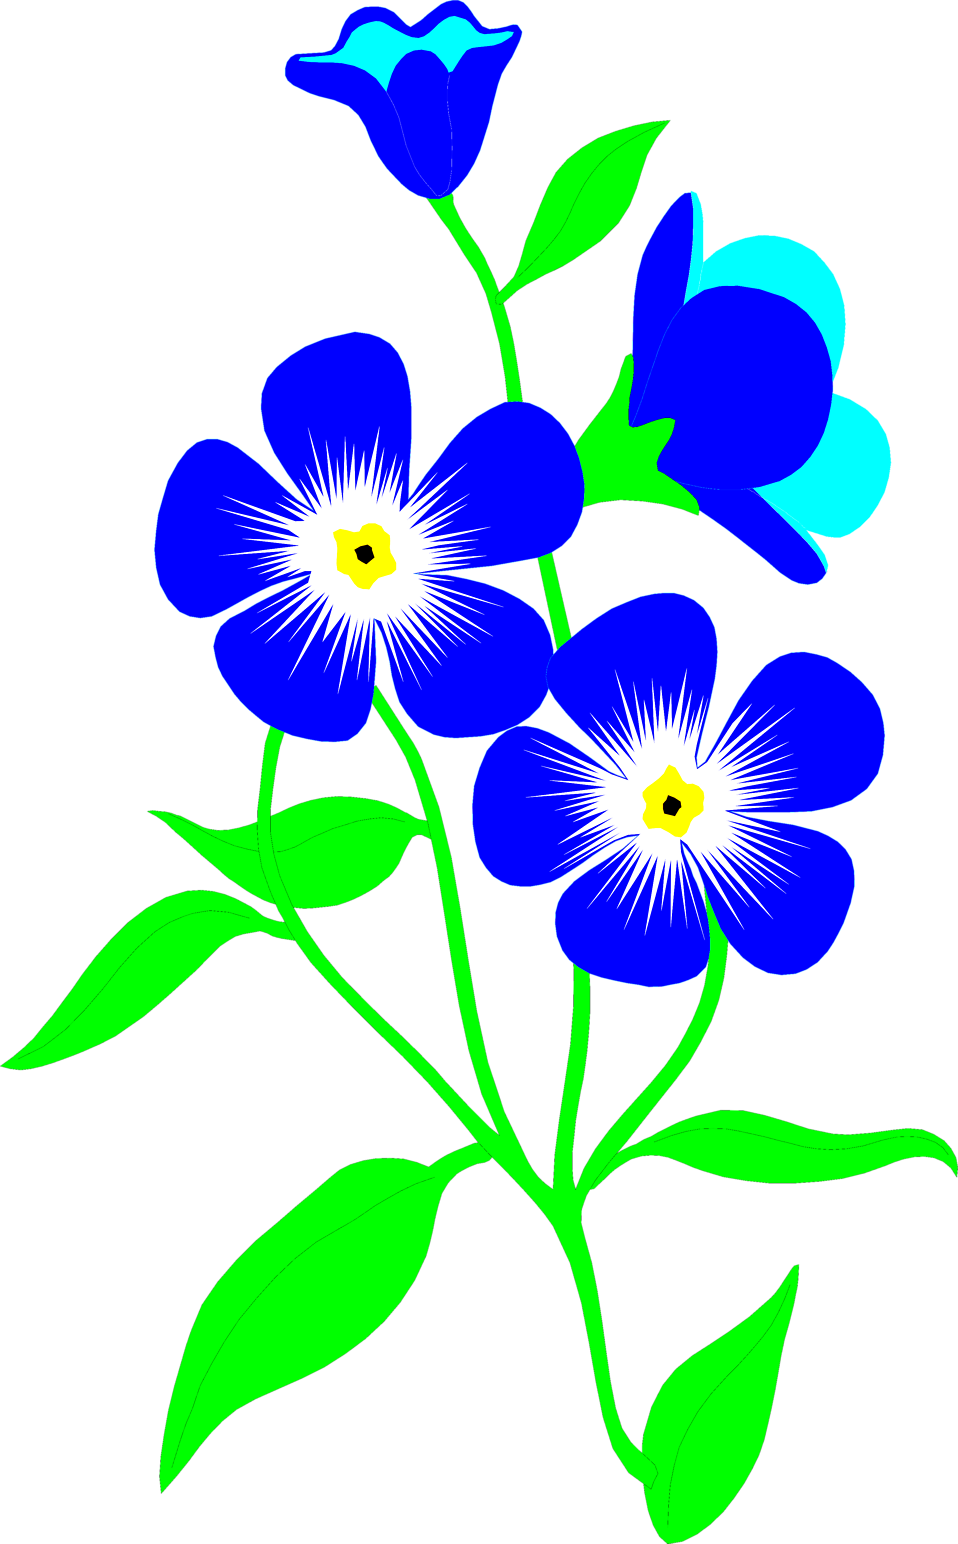 Flowers Blue | Free Stock Photo | Illustration of blue forget-me ...